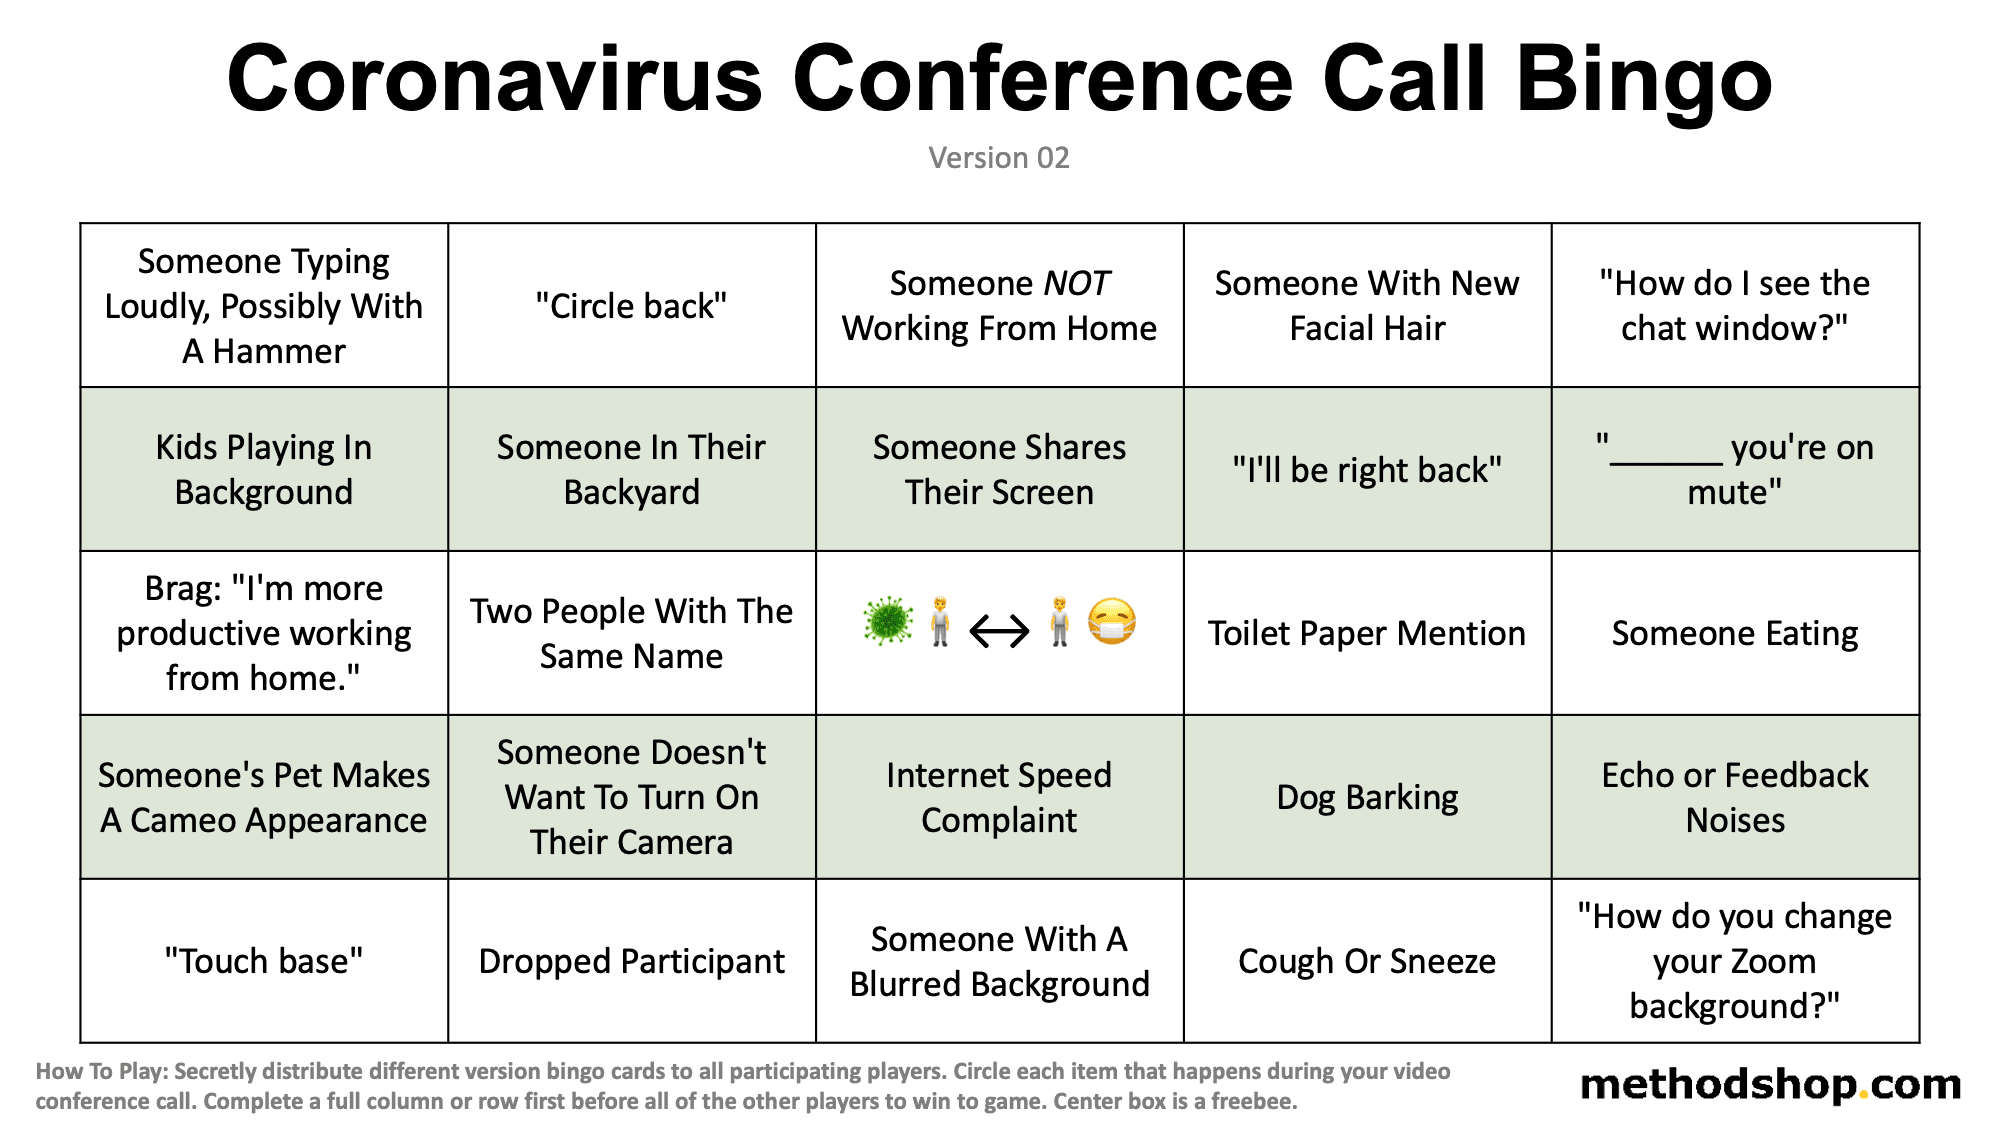 Conference Call Bingo Zoom Background